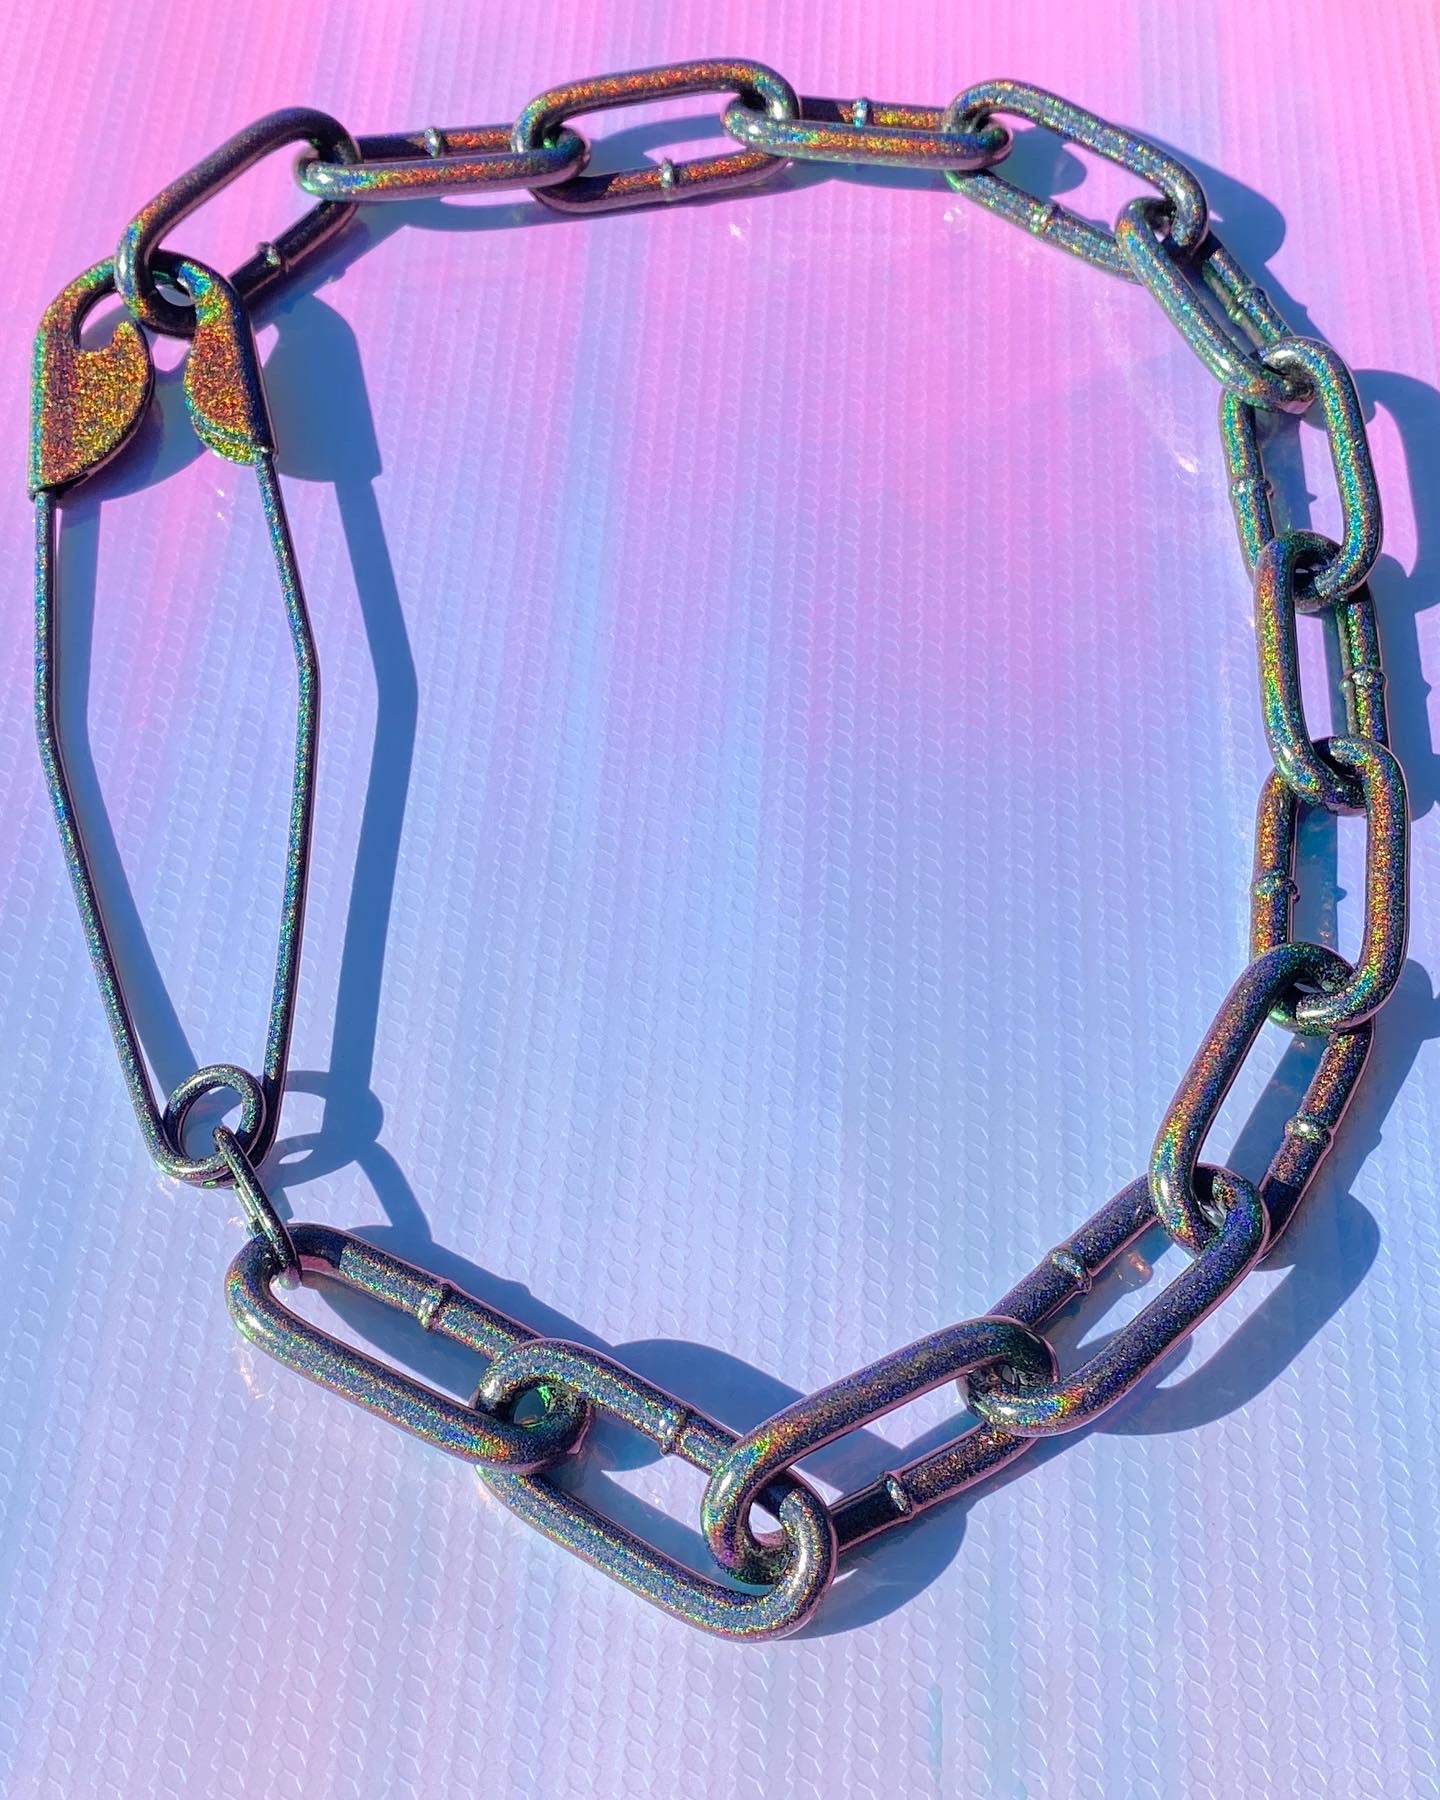 GIANT SAFETY PIN NECKLACE IN NEON YELLOW – BITCHFIST